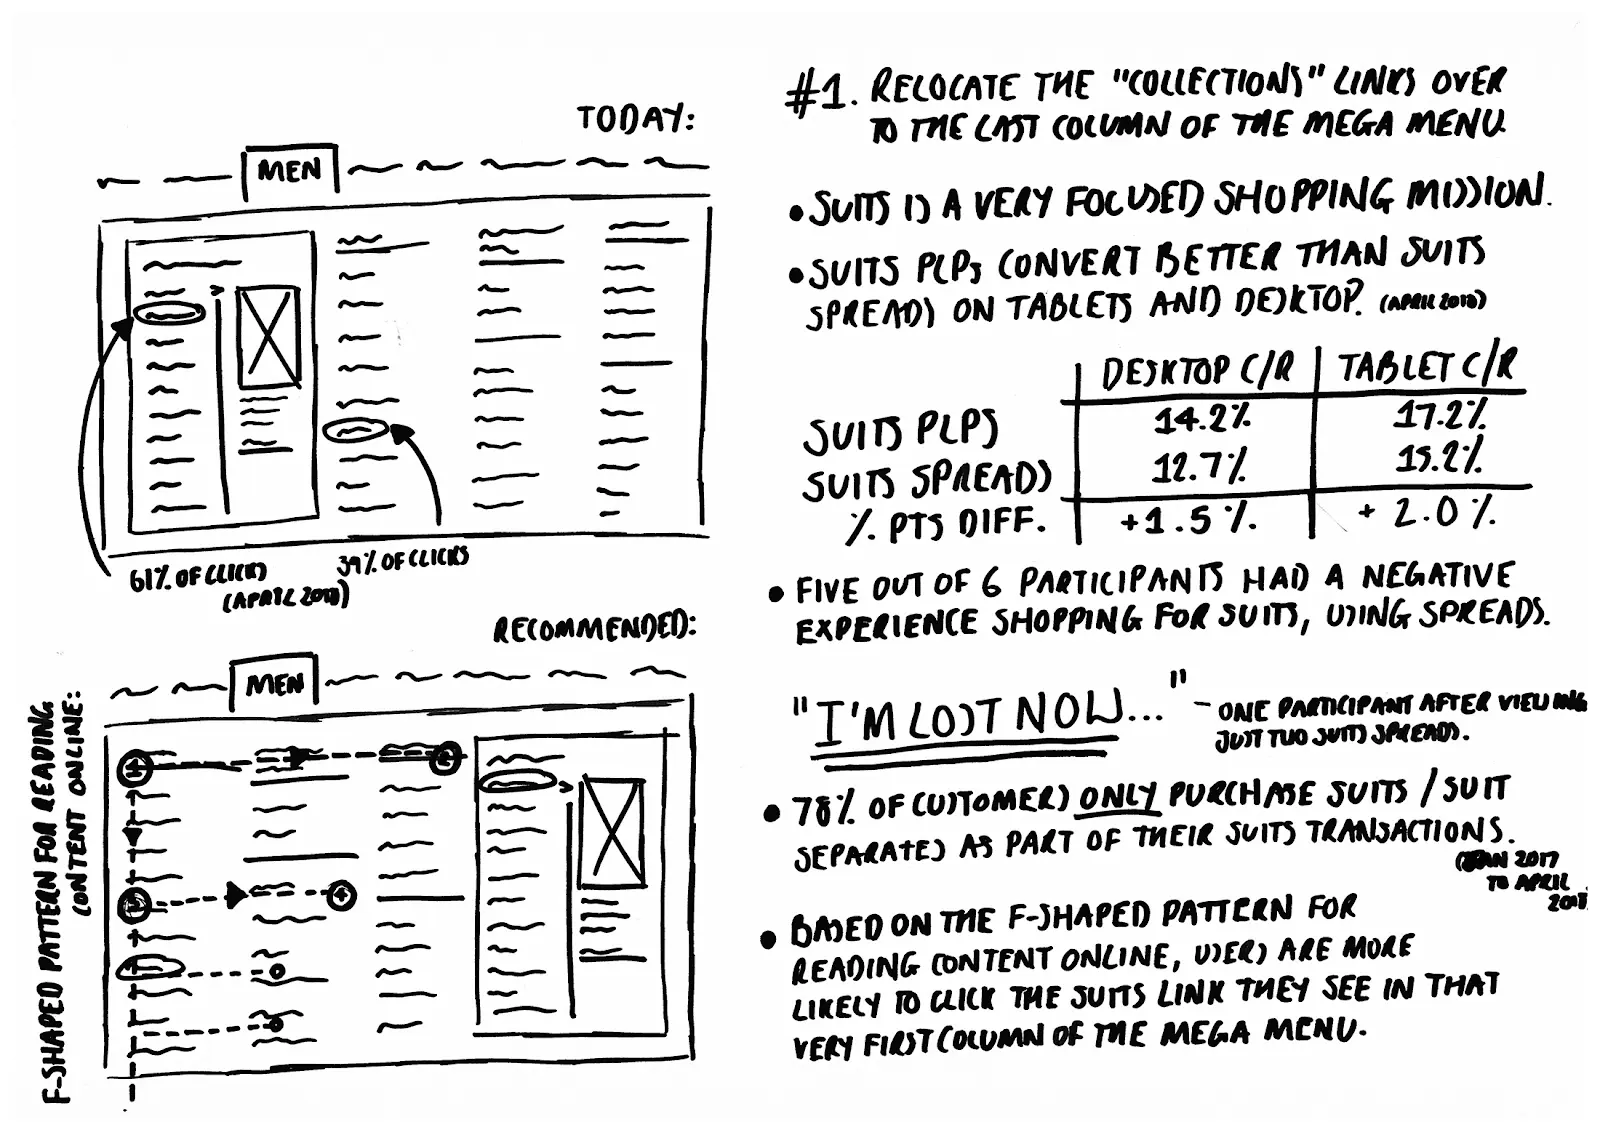 Wireframe sketch highlighting improved placement and design of "Suits" menu item for better online visibility.